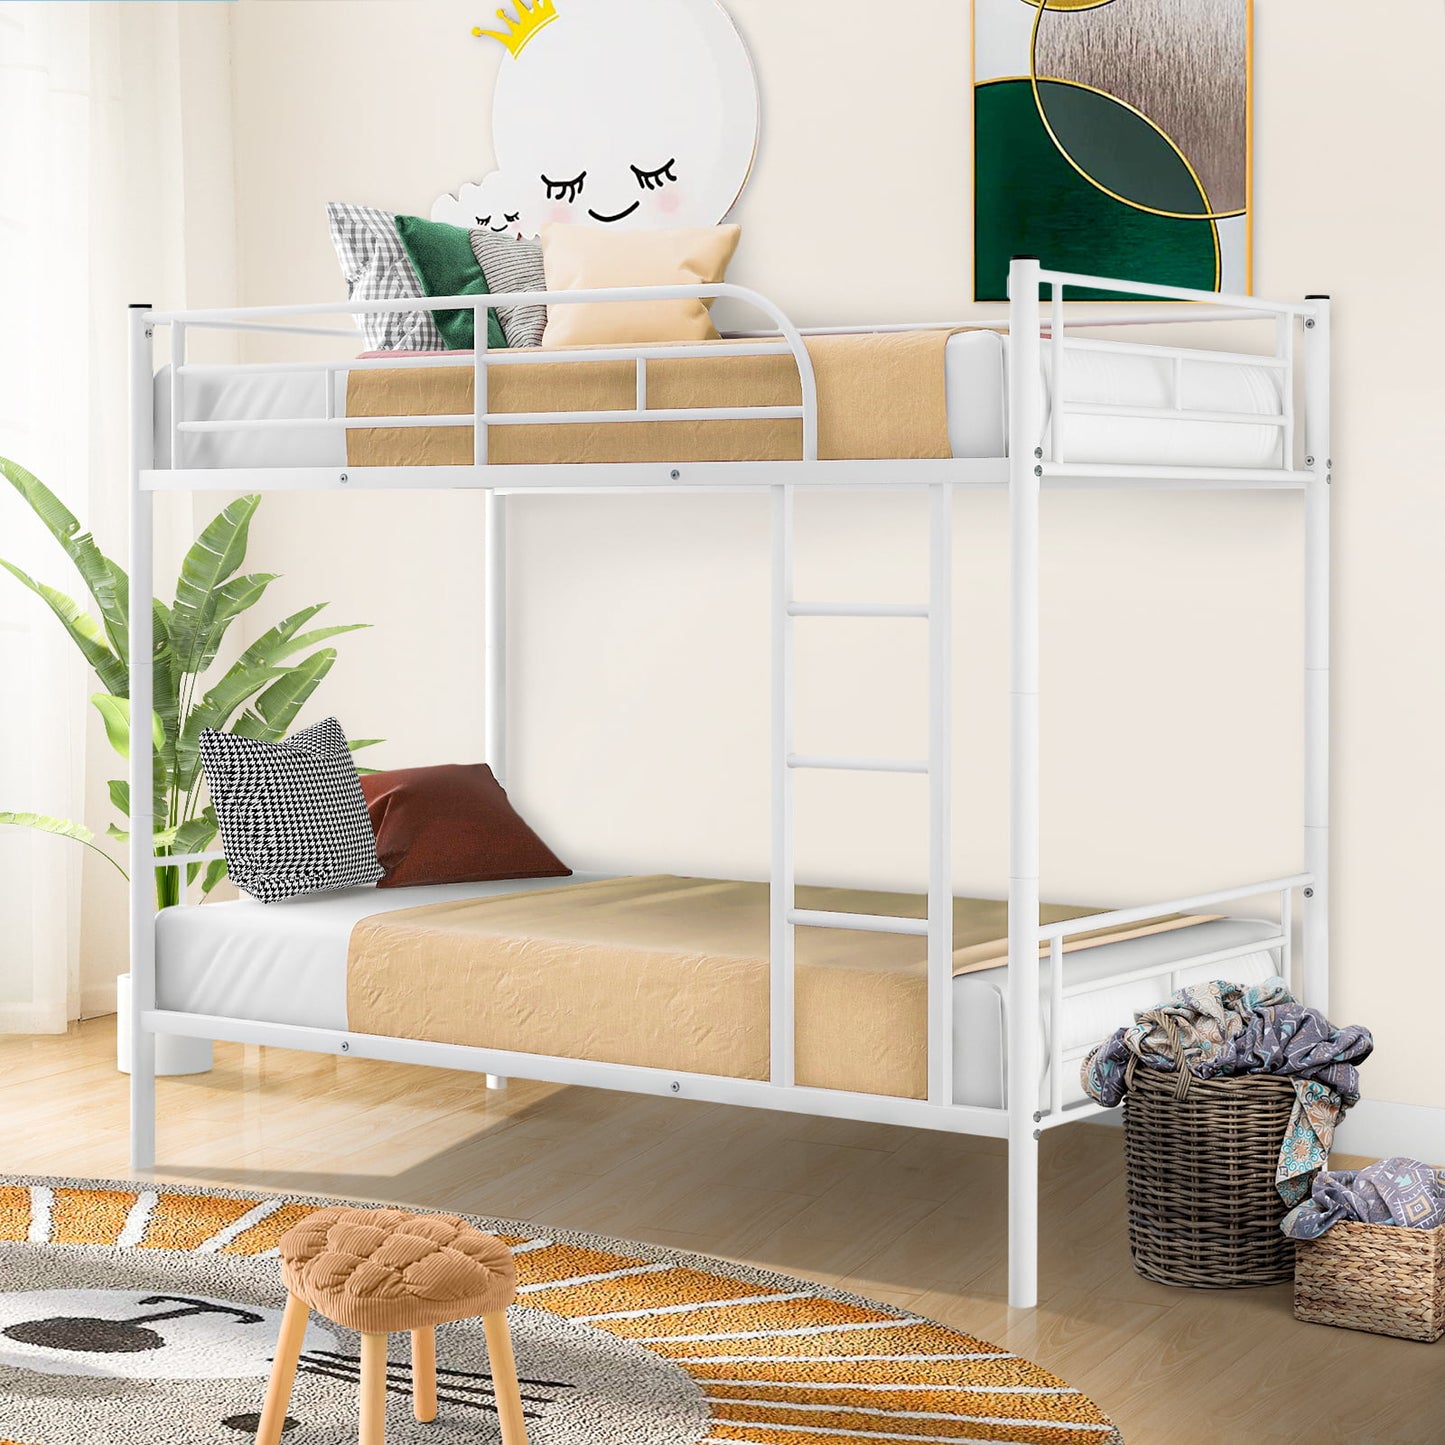 Syngar Bunk Bed with Escalator, Metal Twin Over Twin Bunk Bed with Full-length Guardrail and 1 Built-in Ladders, Loft Bunk Bed for Bedroom Guest Room Apartment, White, LJ3321